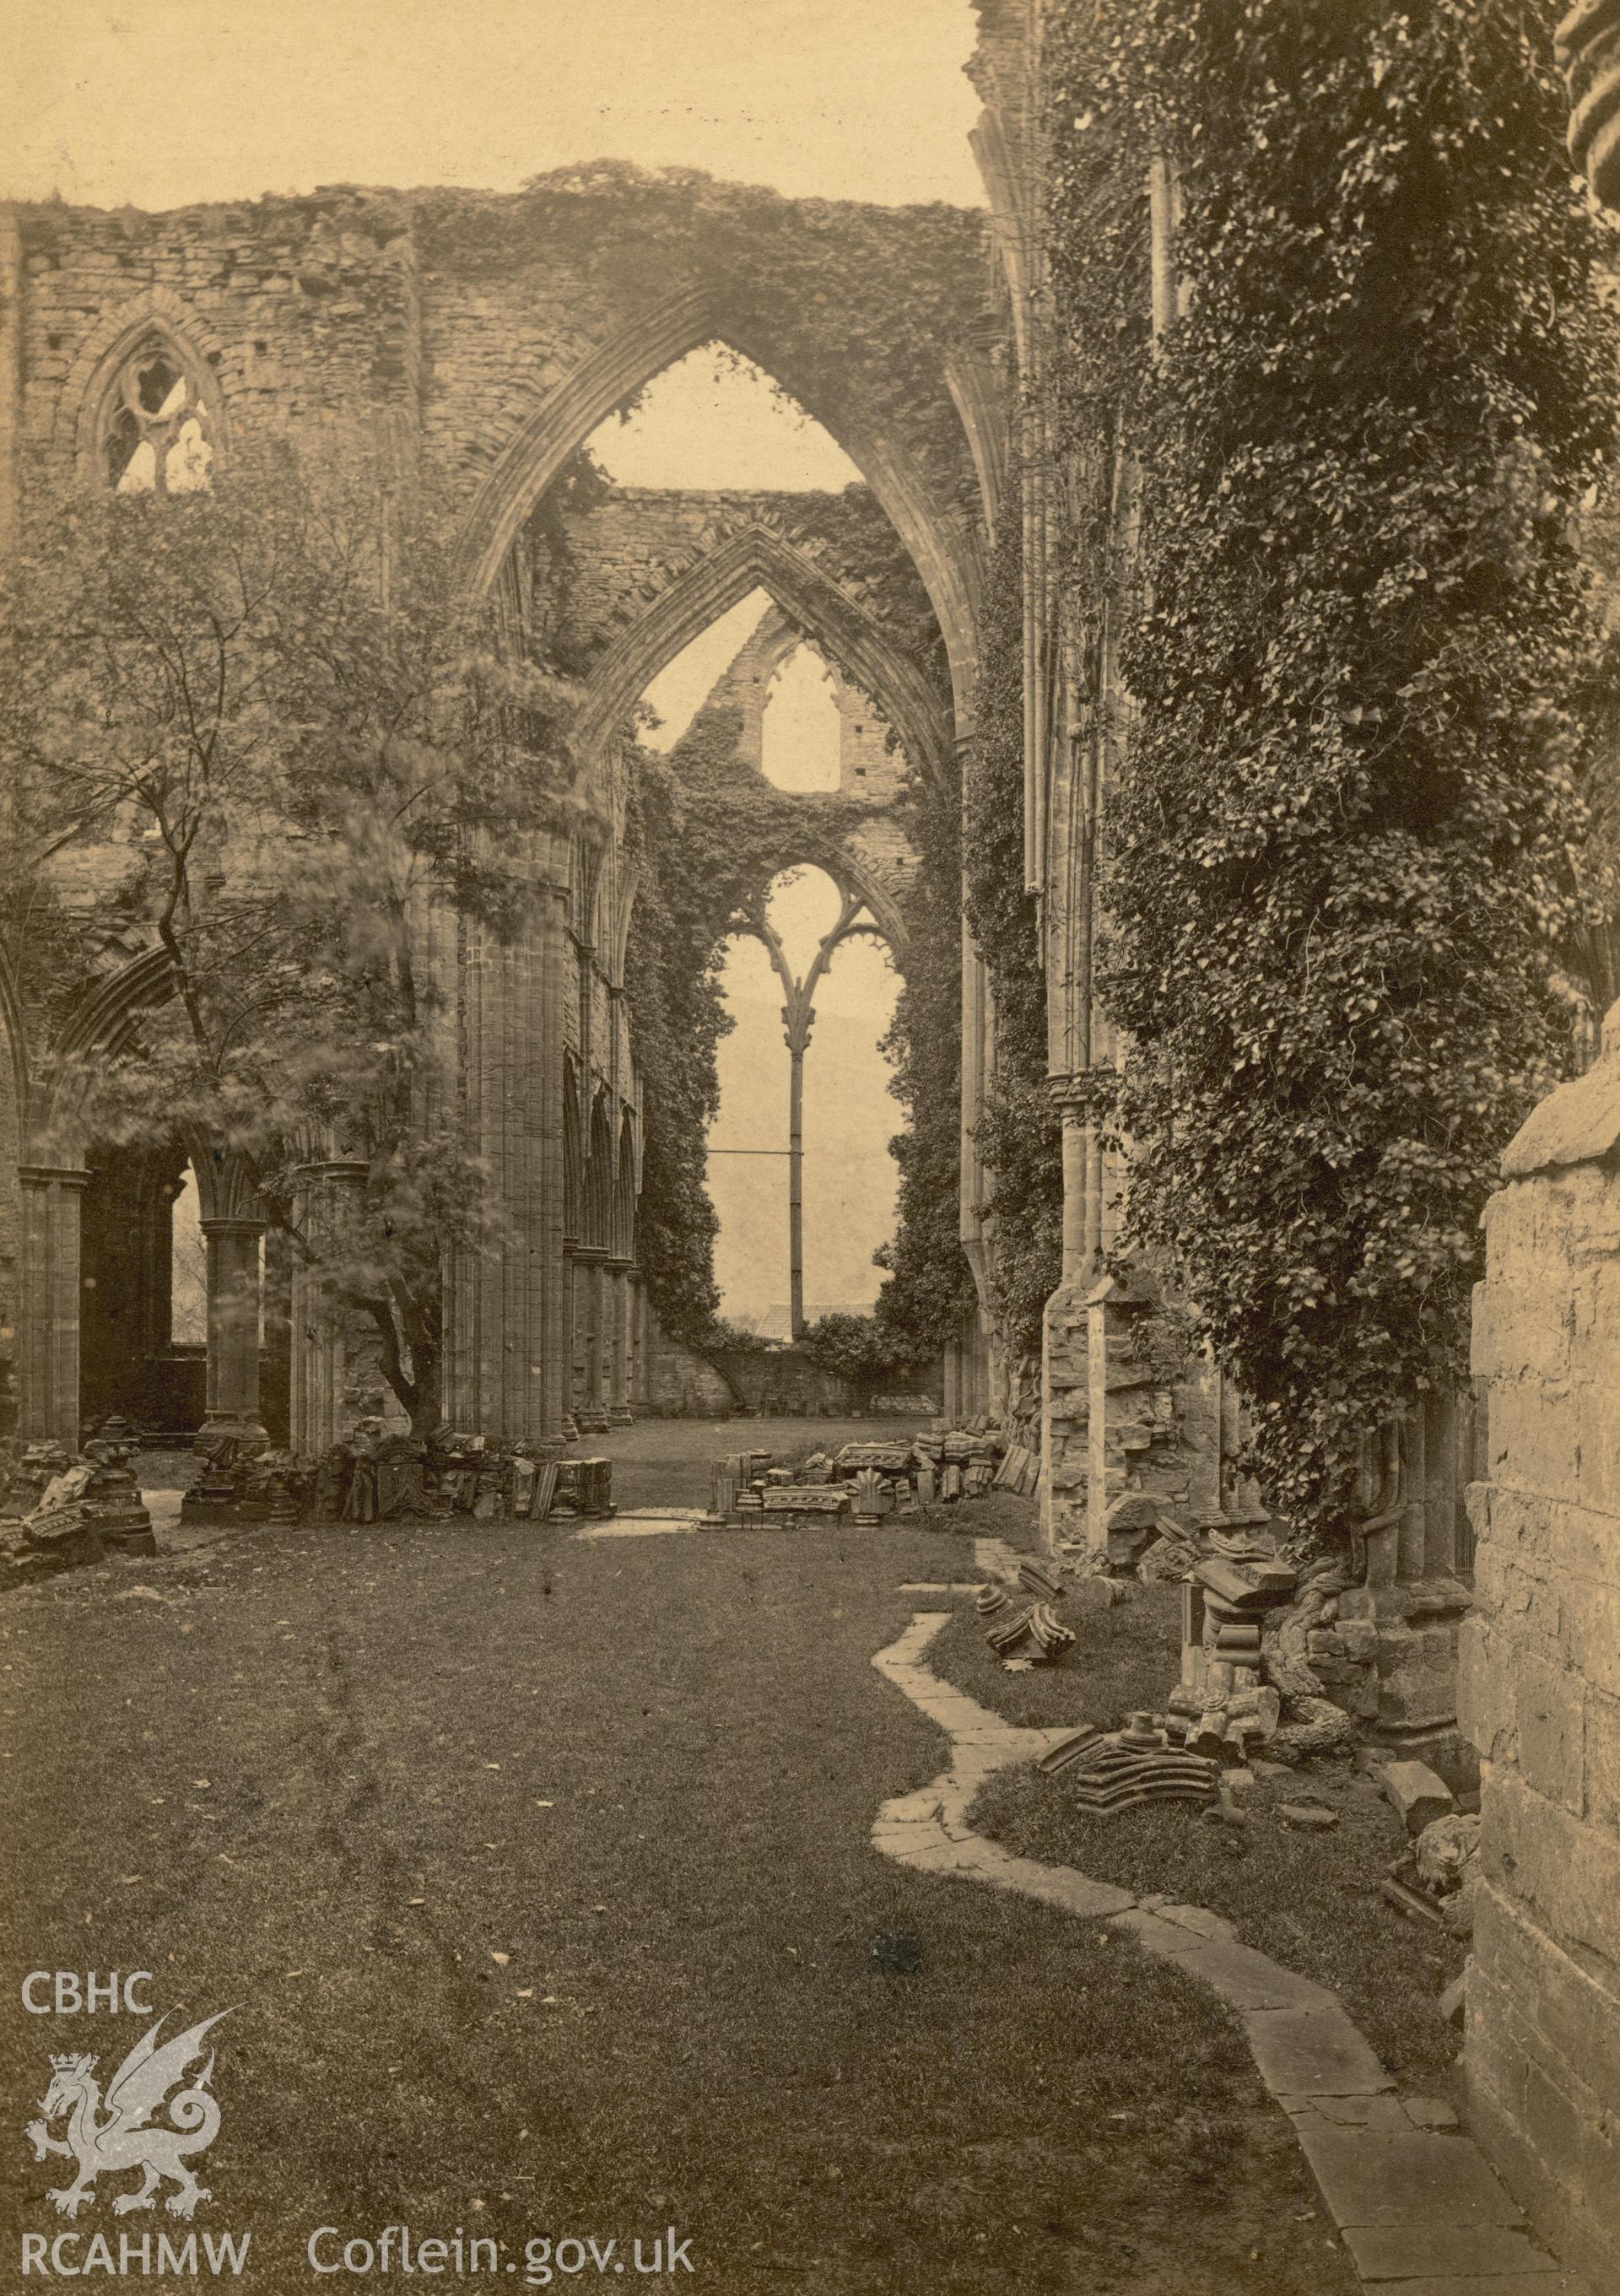 Digital copy of a circa 1895 albumen print showing an interior view of Tintern Abbey, looking east.